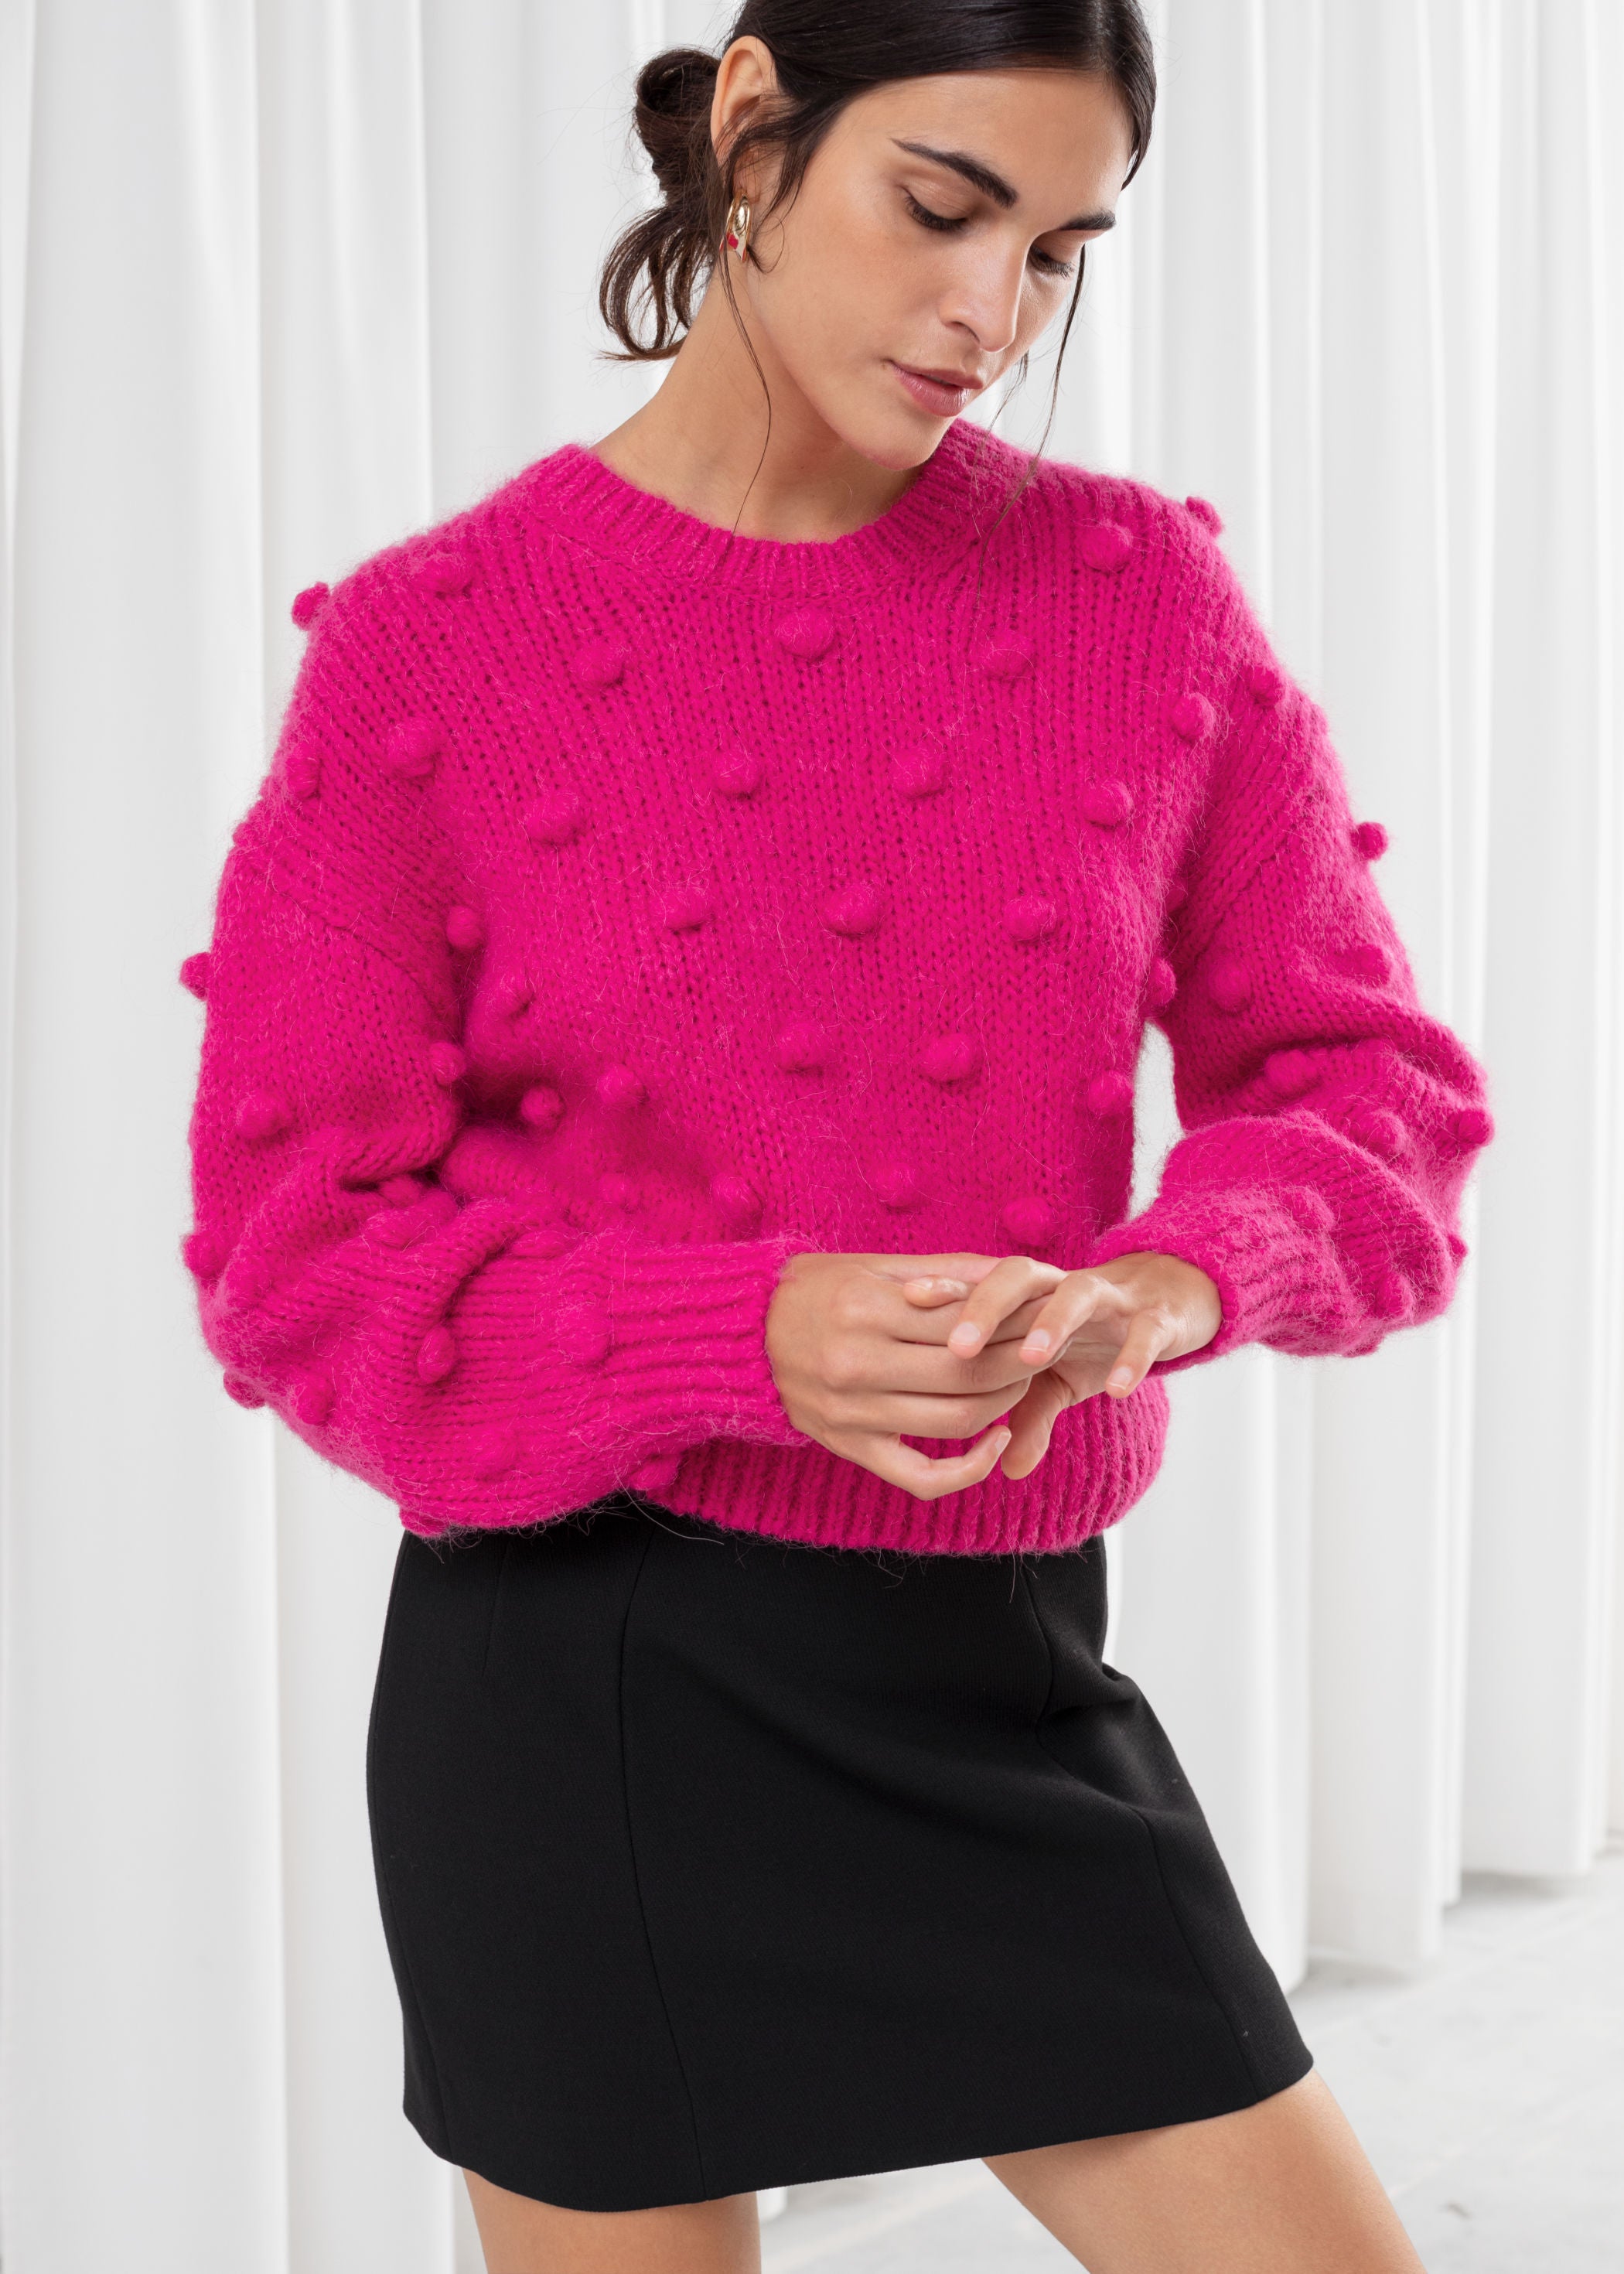 & Other Stories + Alpaca Wool Knit Bobble Sweater